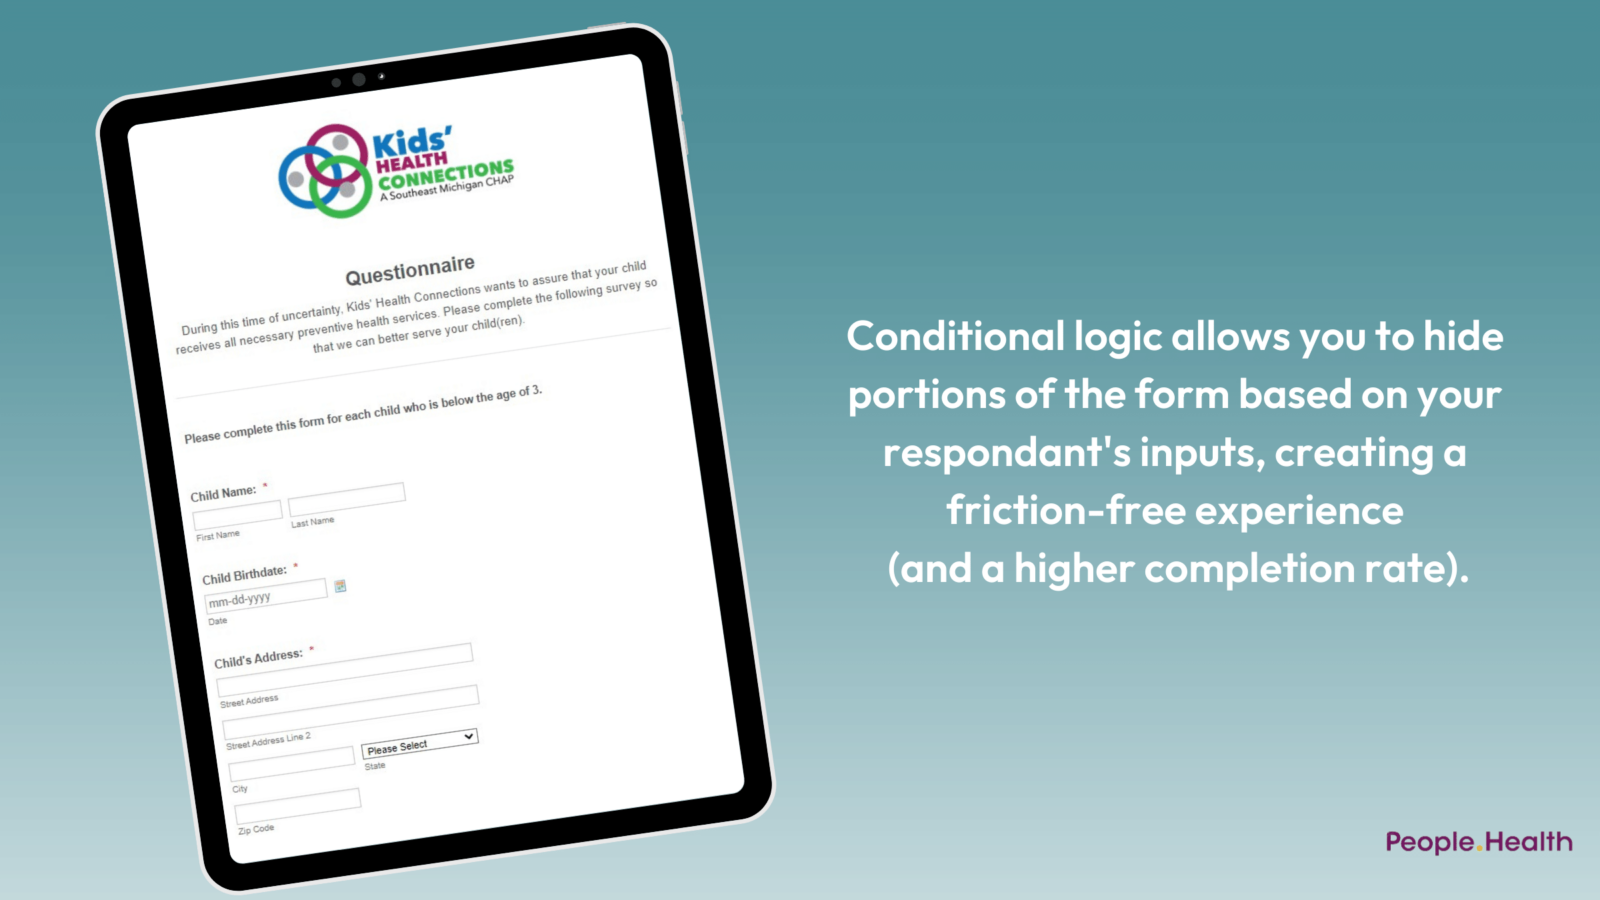 Conditional logic allows you to hide portions of the form based on your respondant's inputs, creating a friction-free experience (and a higher completion rate).